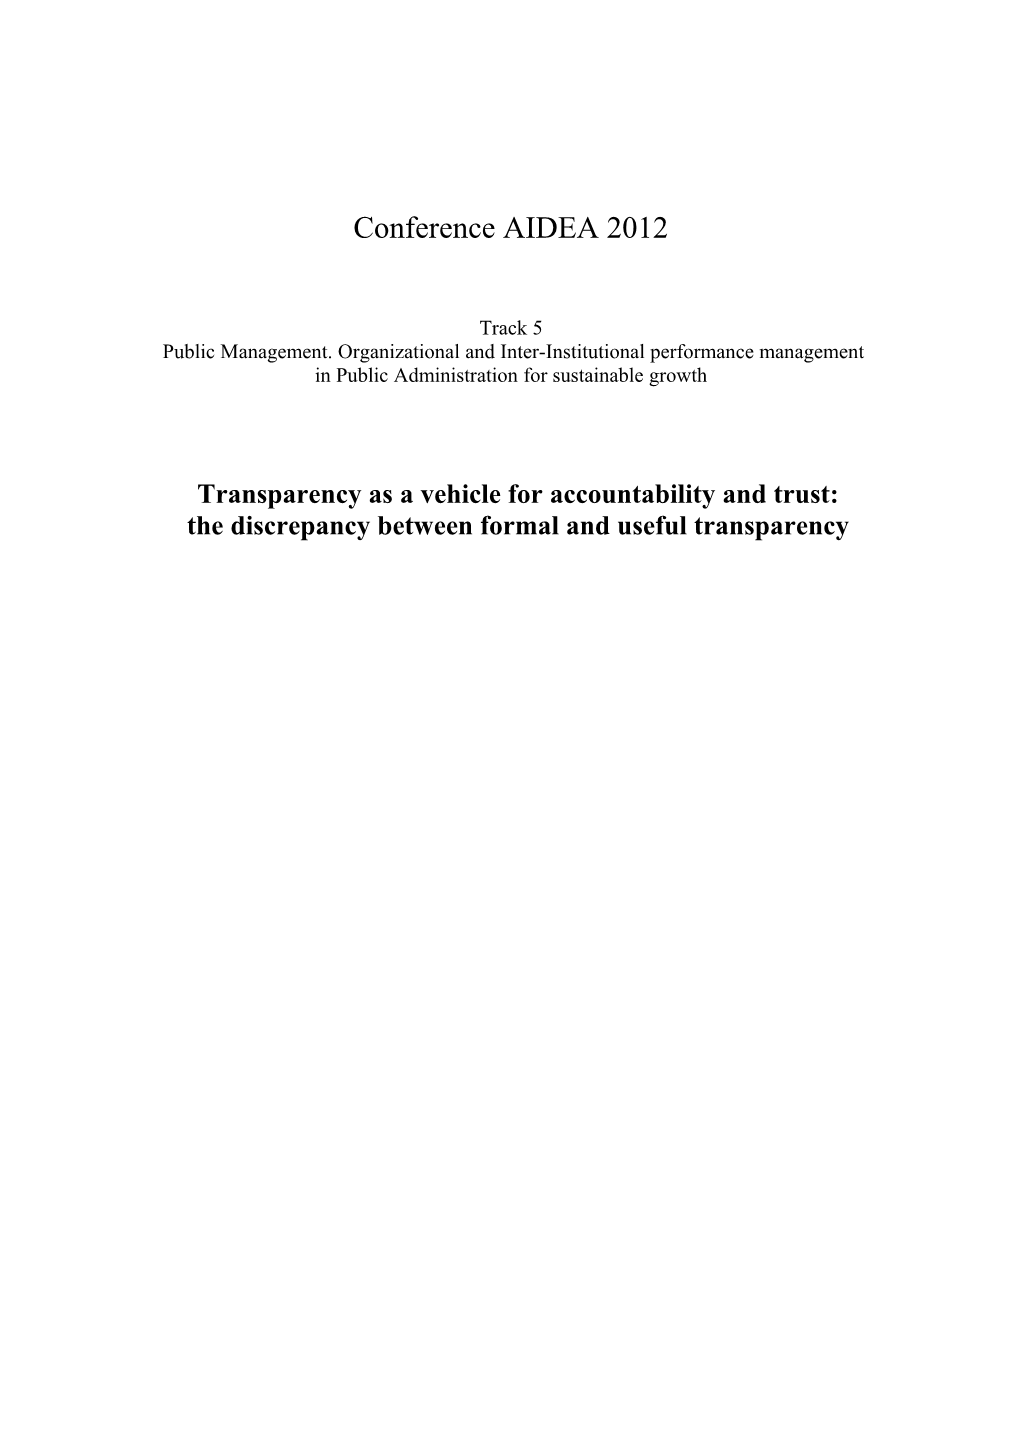 Making Transparency Transparent: an Assessment Model for Local Government